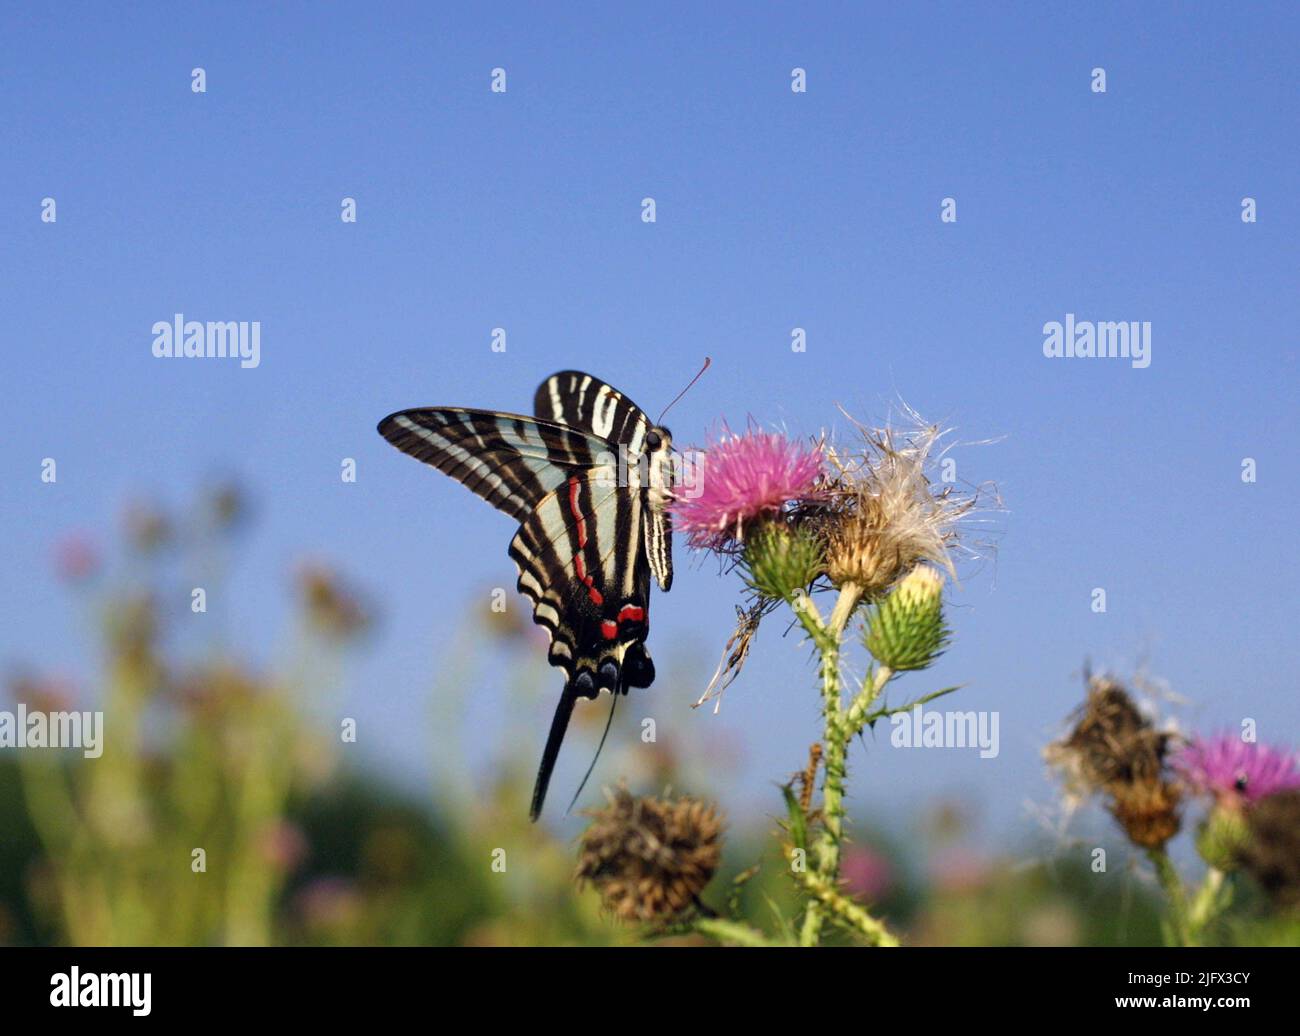 This Zebra Swallowtail butterfly is drinking nectar from a plumeless thistle flower in an abandoned agricultural field at Banshee Reeks Nature Preserve in Leesburg, Virginia, USA. Butterflies are important pollinators to the environment as they can carry pollen over great distances to aid in the growth of new plants. Credit: E.A.Sellers Stock Photo